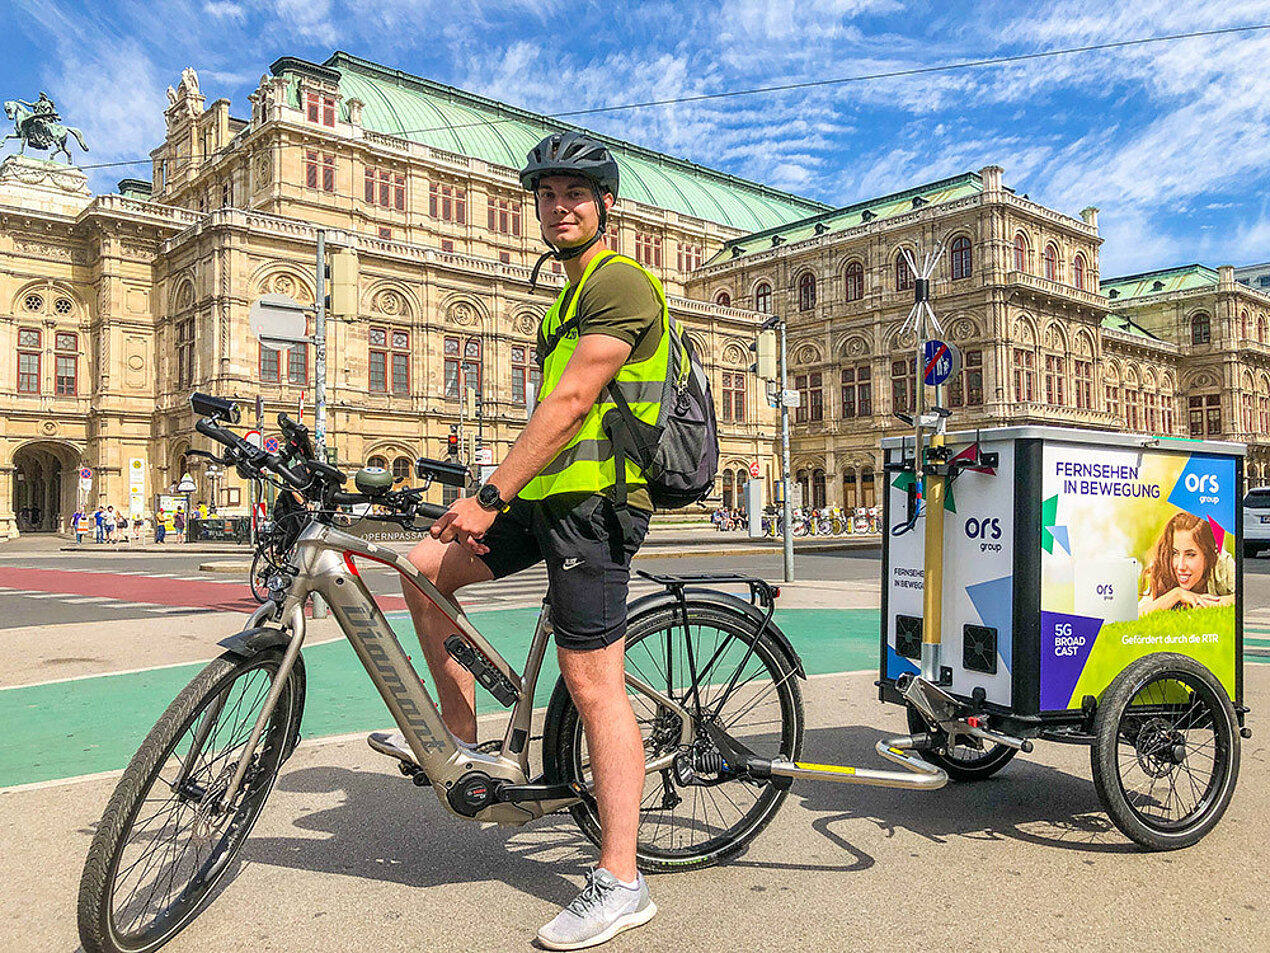 Man with bicycle and trailer in front of State Opera Vienna